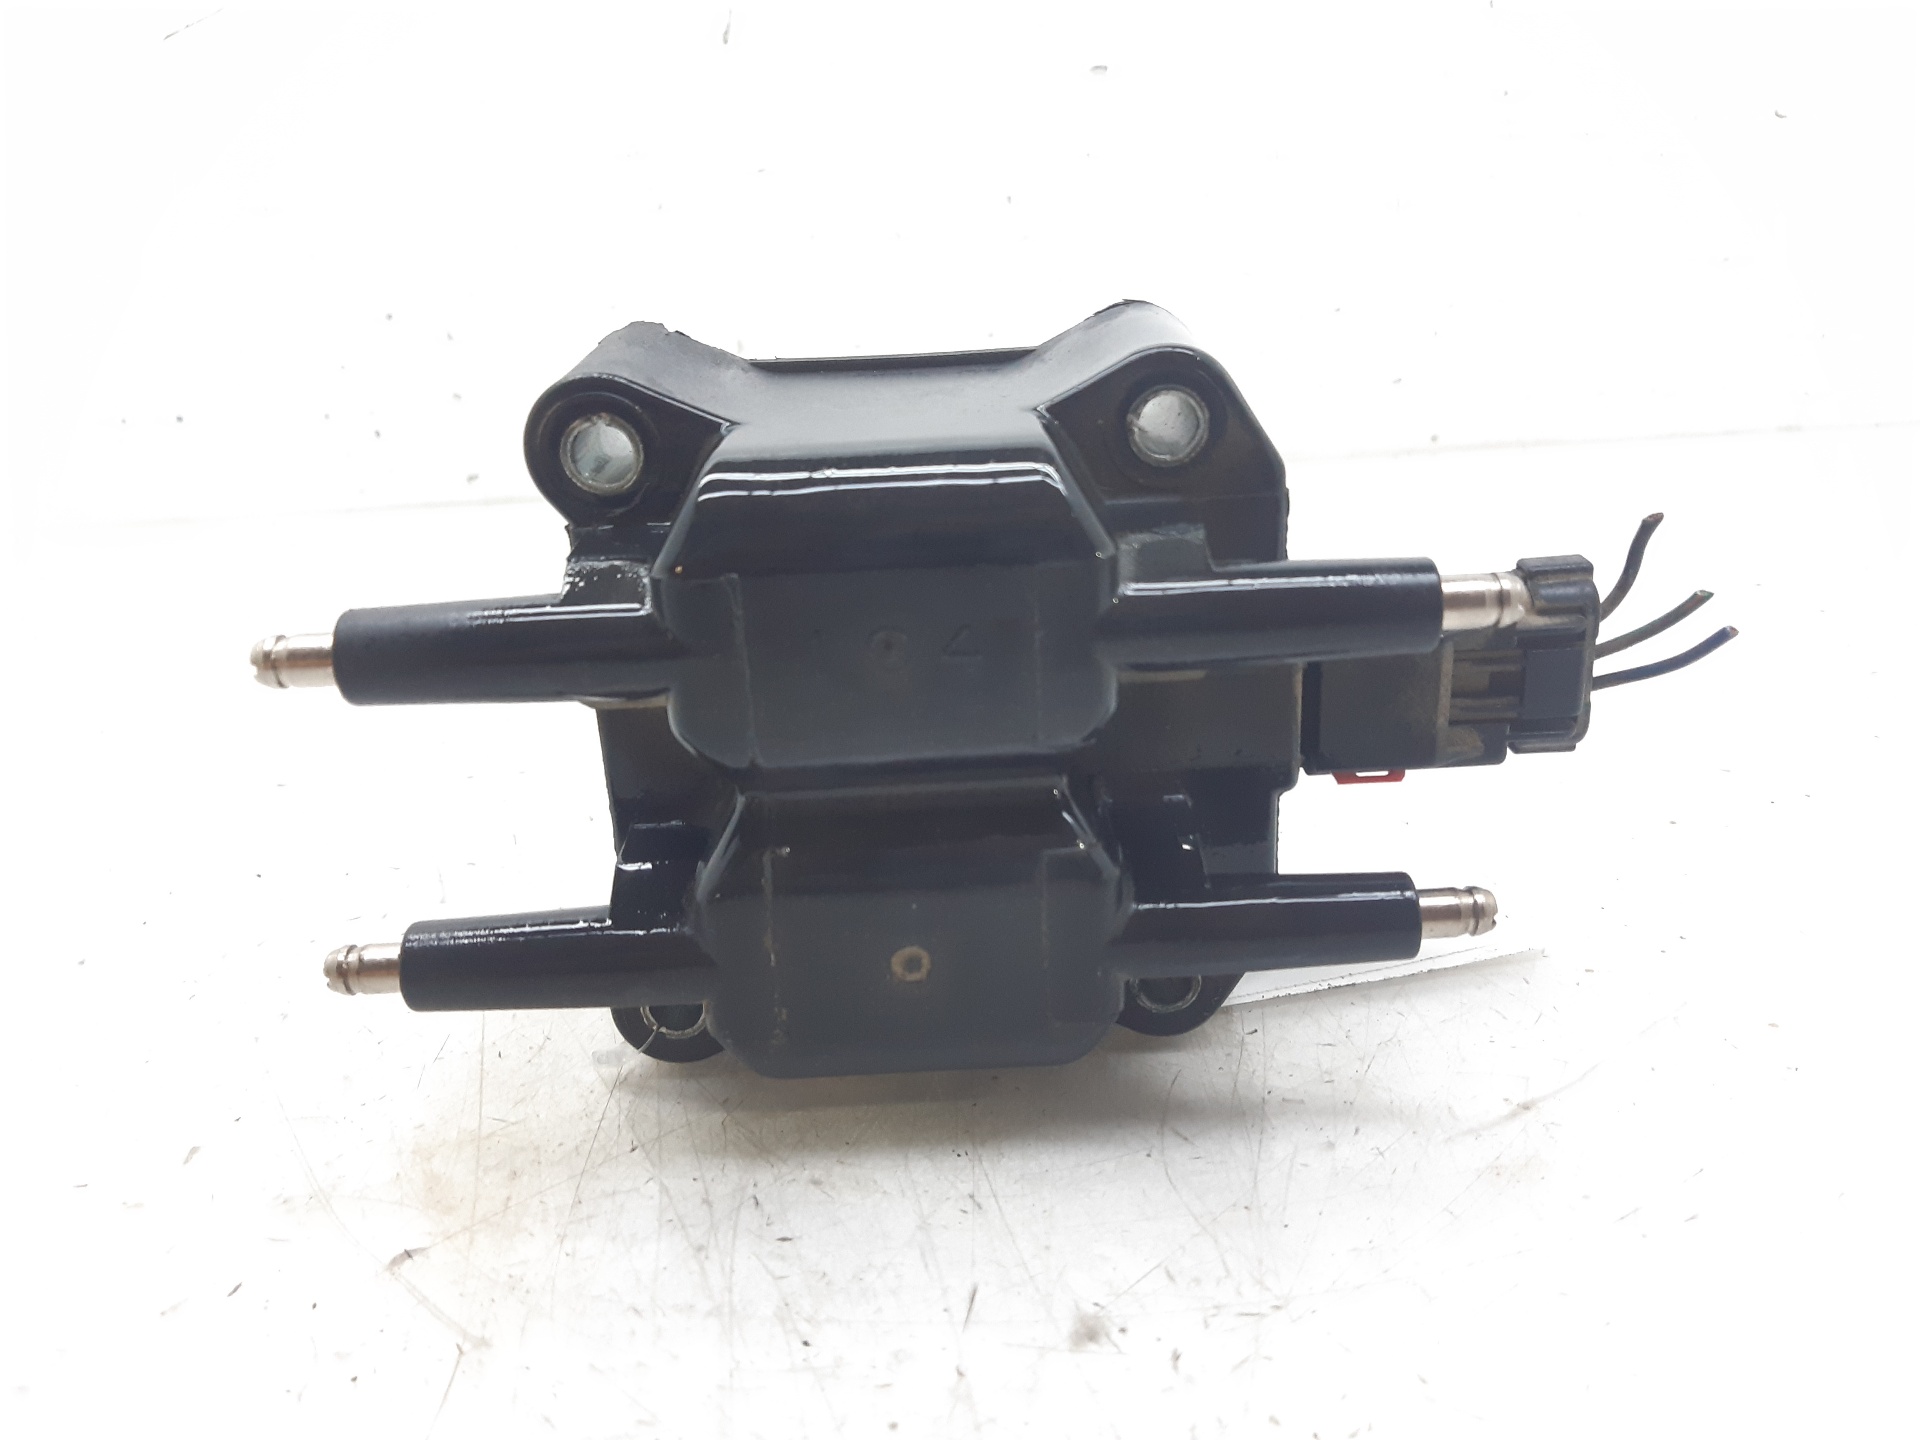 CHRYSLER Stratus 1 generation (1995-2000) High Voltage Ignition Coil 05269670 24035975